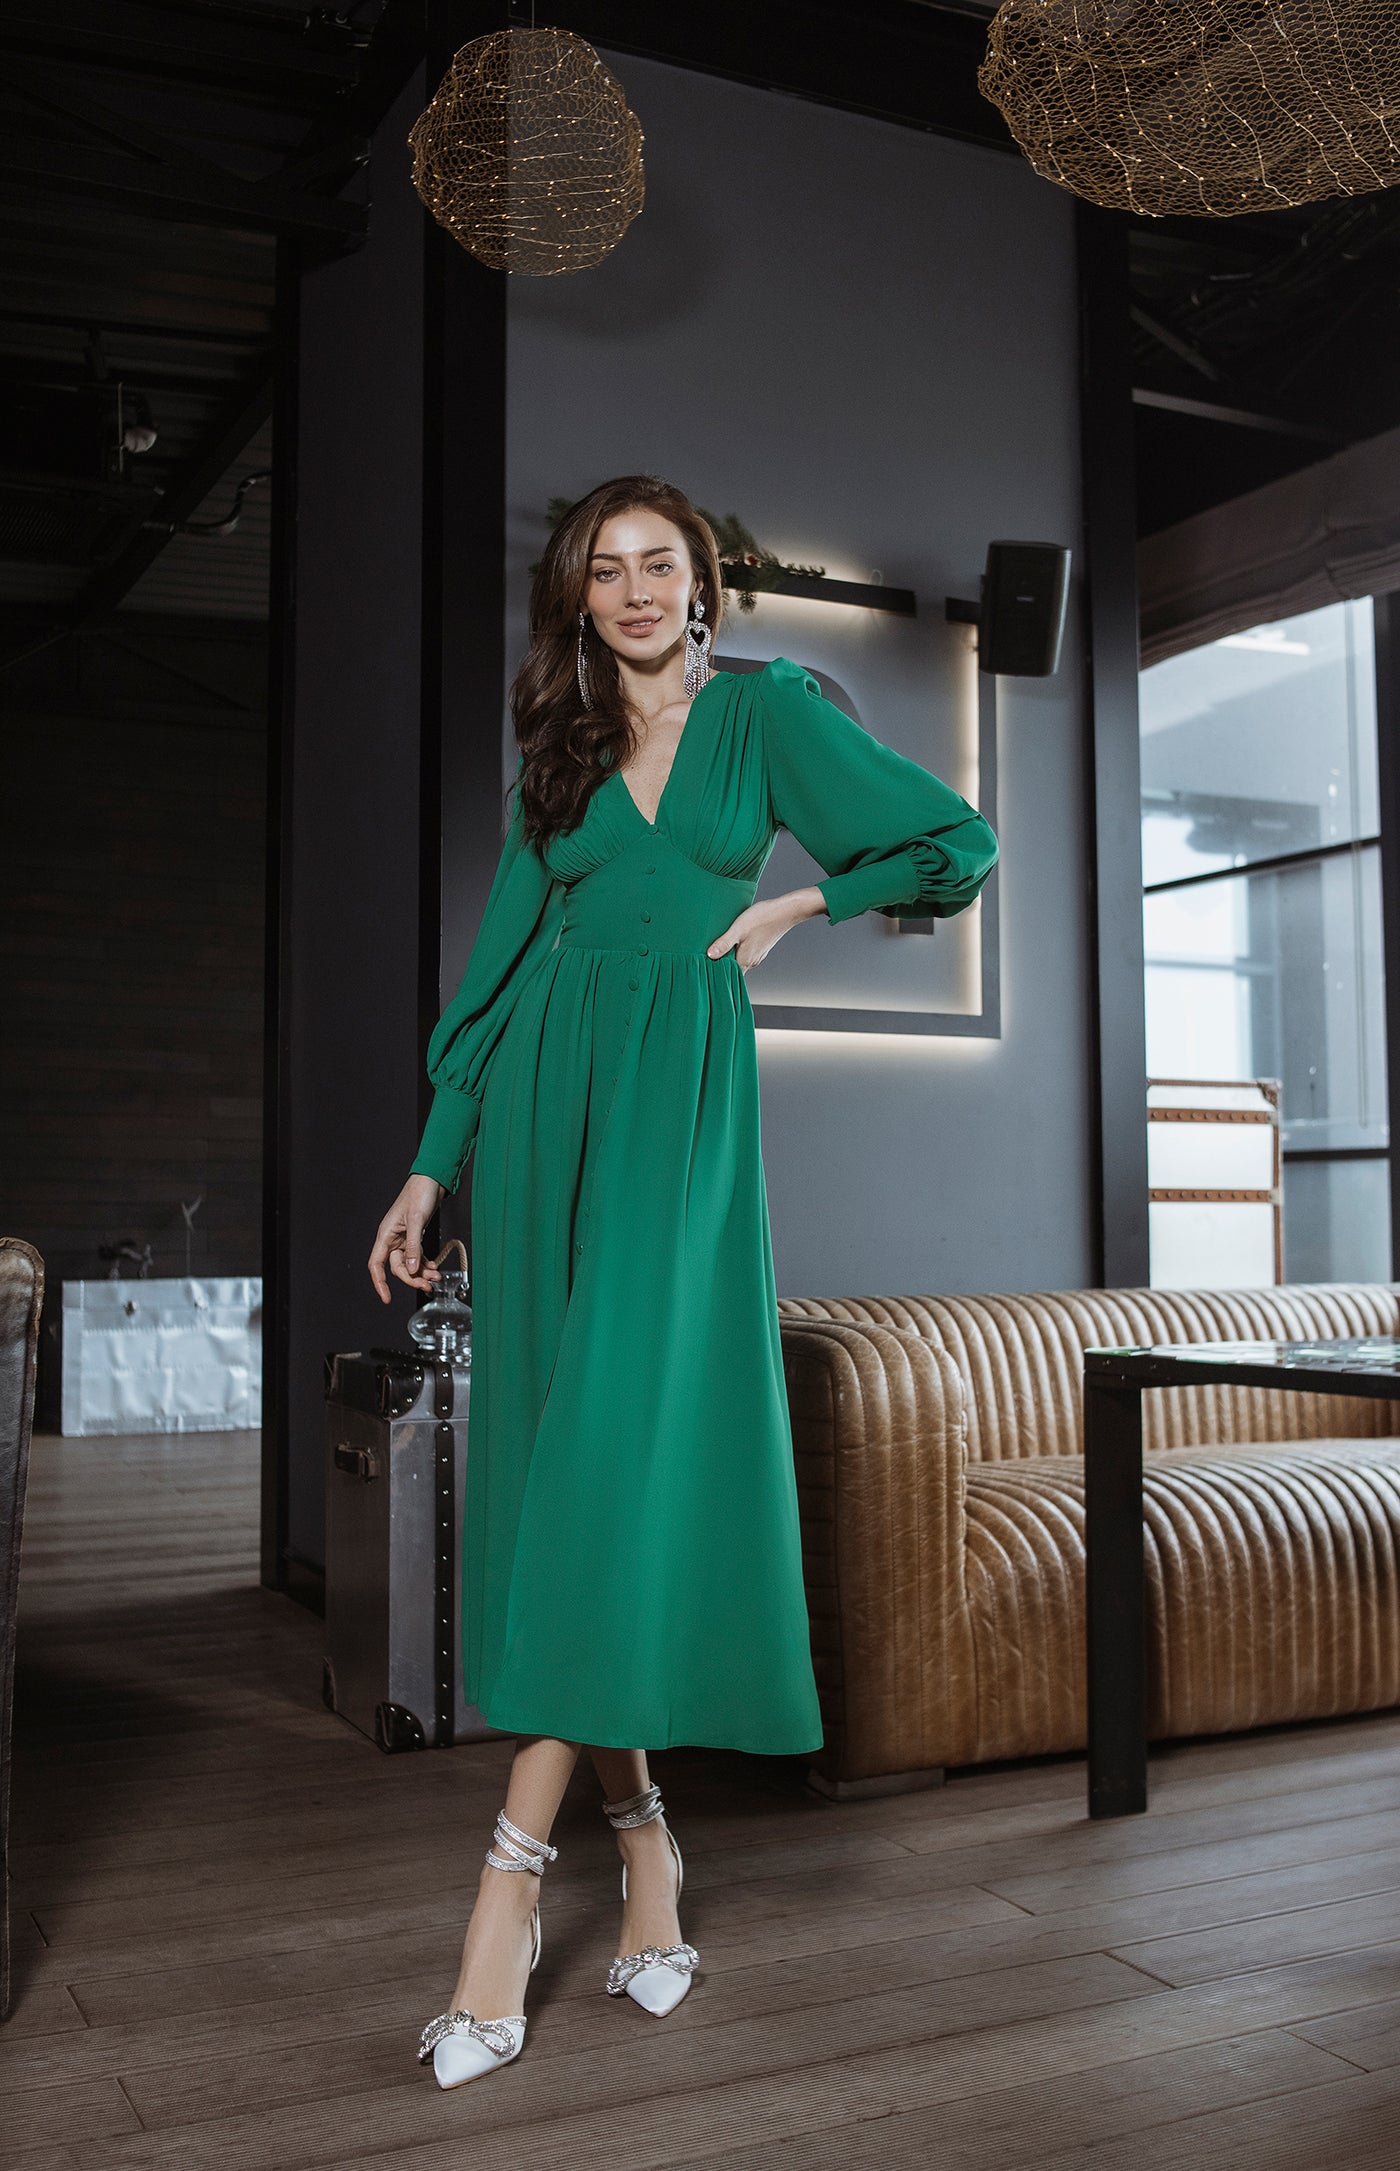 Green V-NECK BUTTONED PUFF-SLEEVE MIDI DRESS (ARTICLE C392)